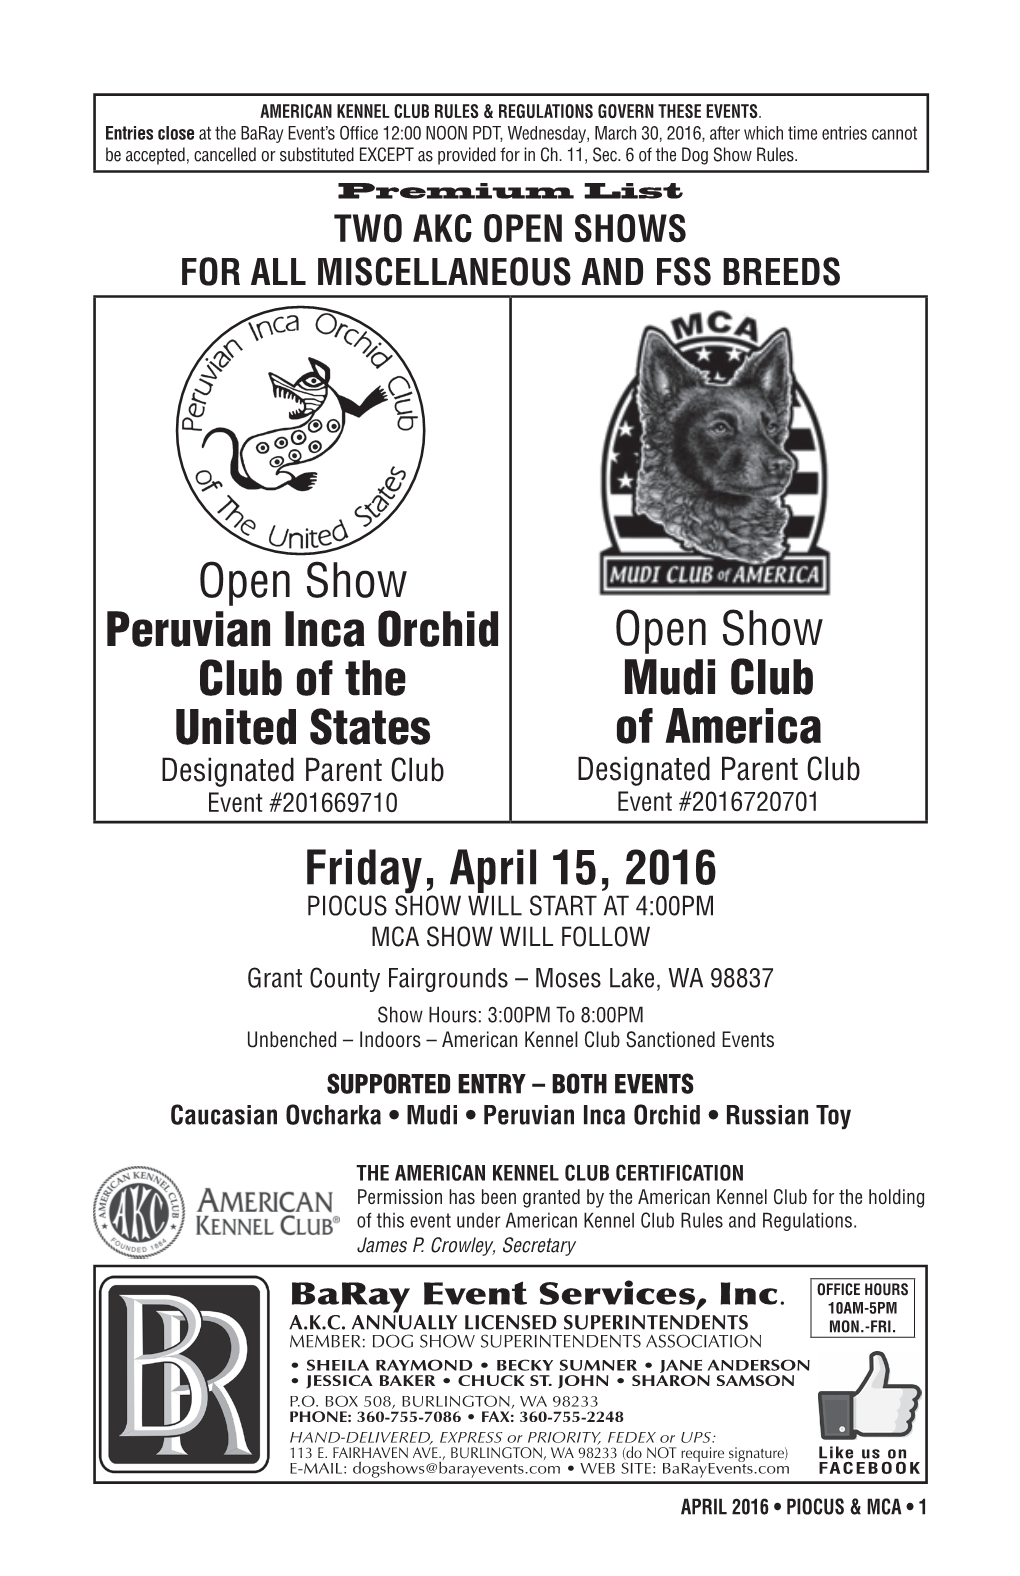 Open Show Peruvian Inca Orchid Club of the United States Open